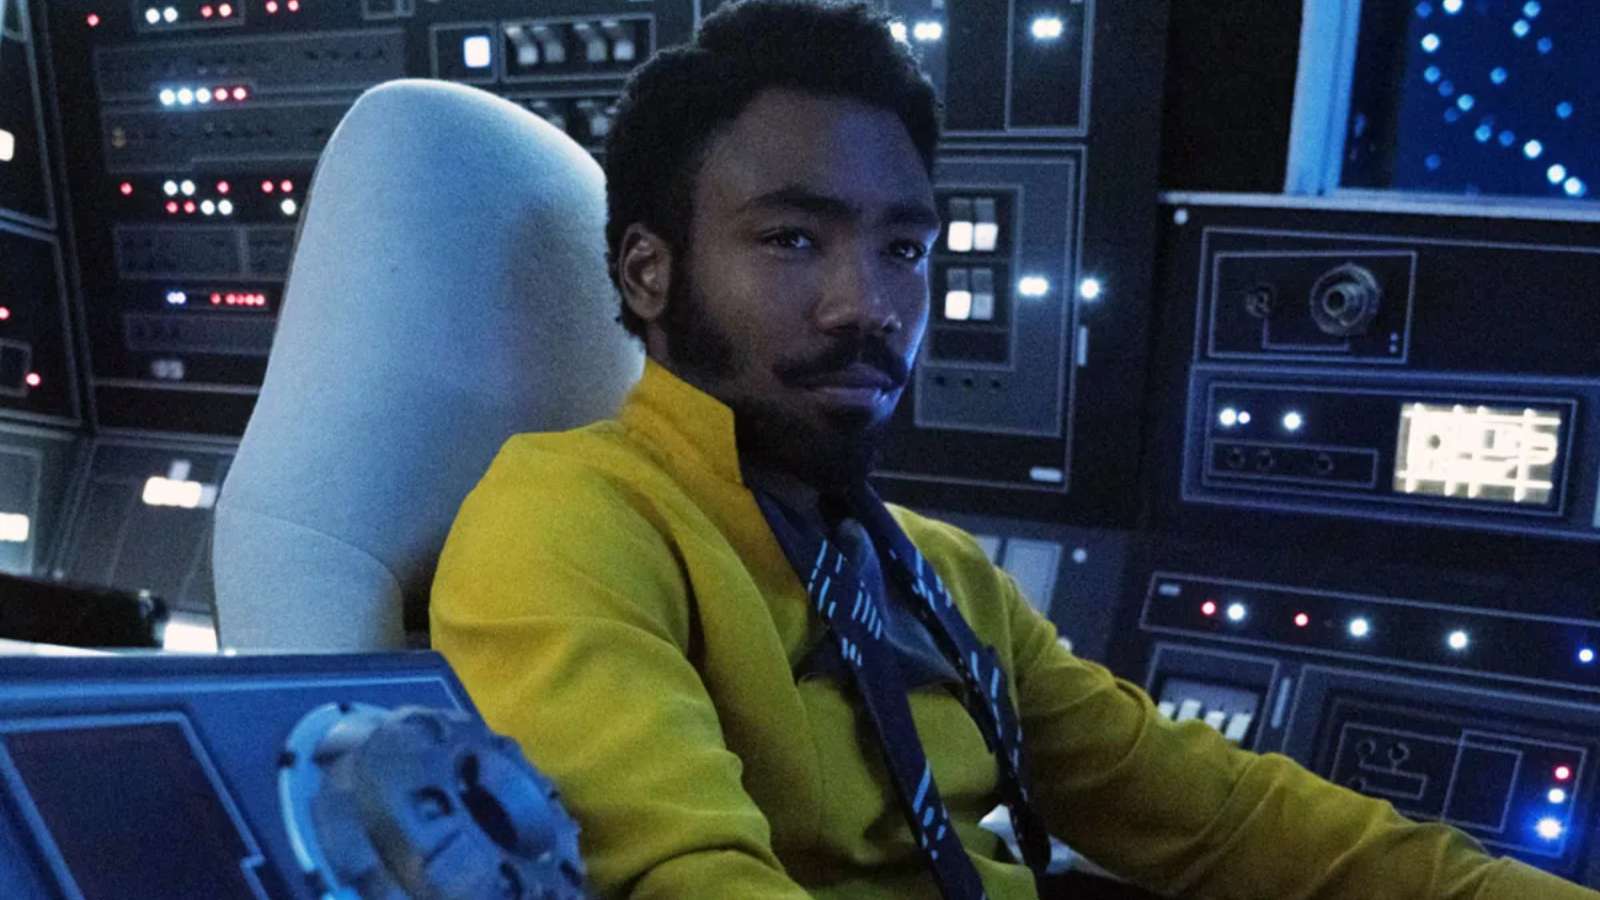 Donald Glover played young Lando